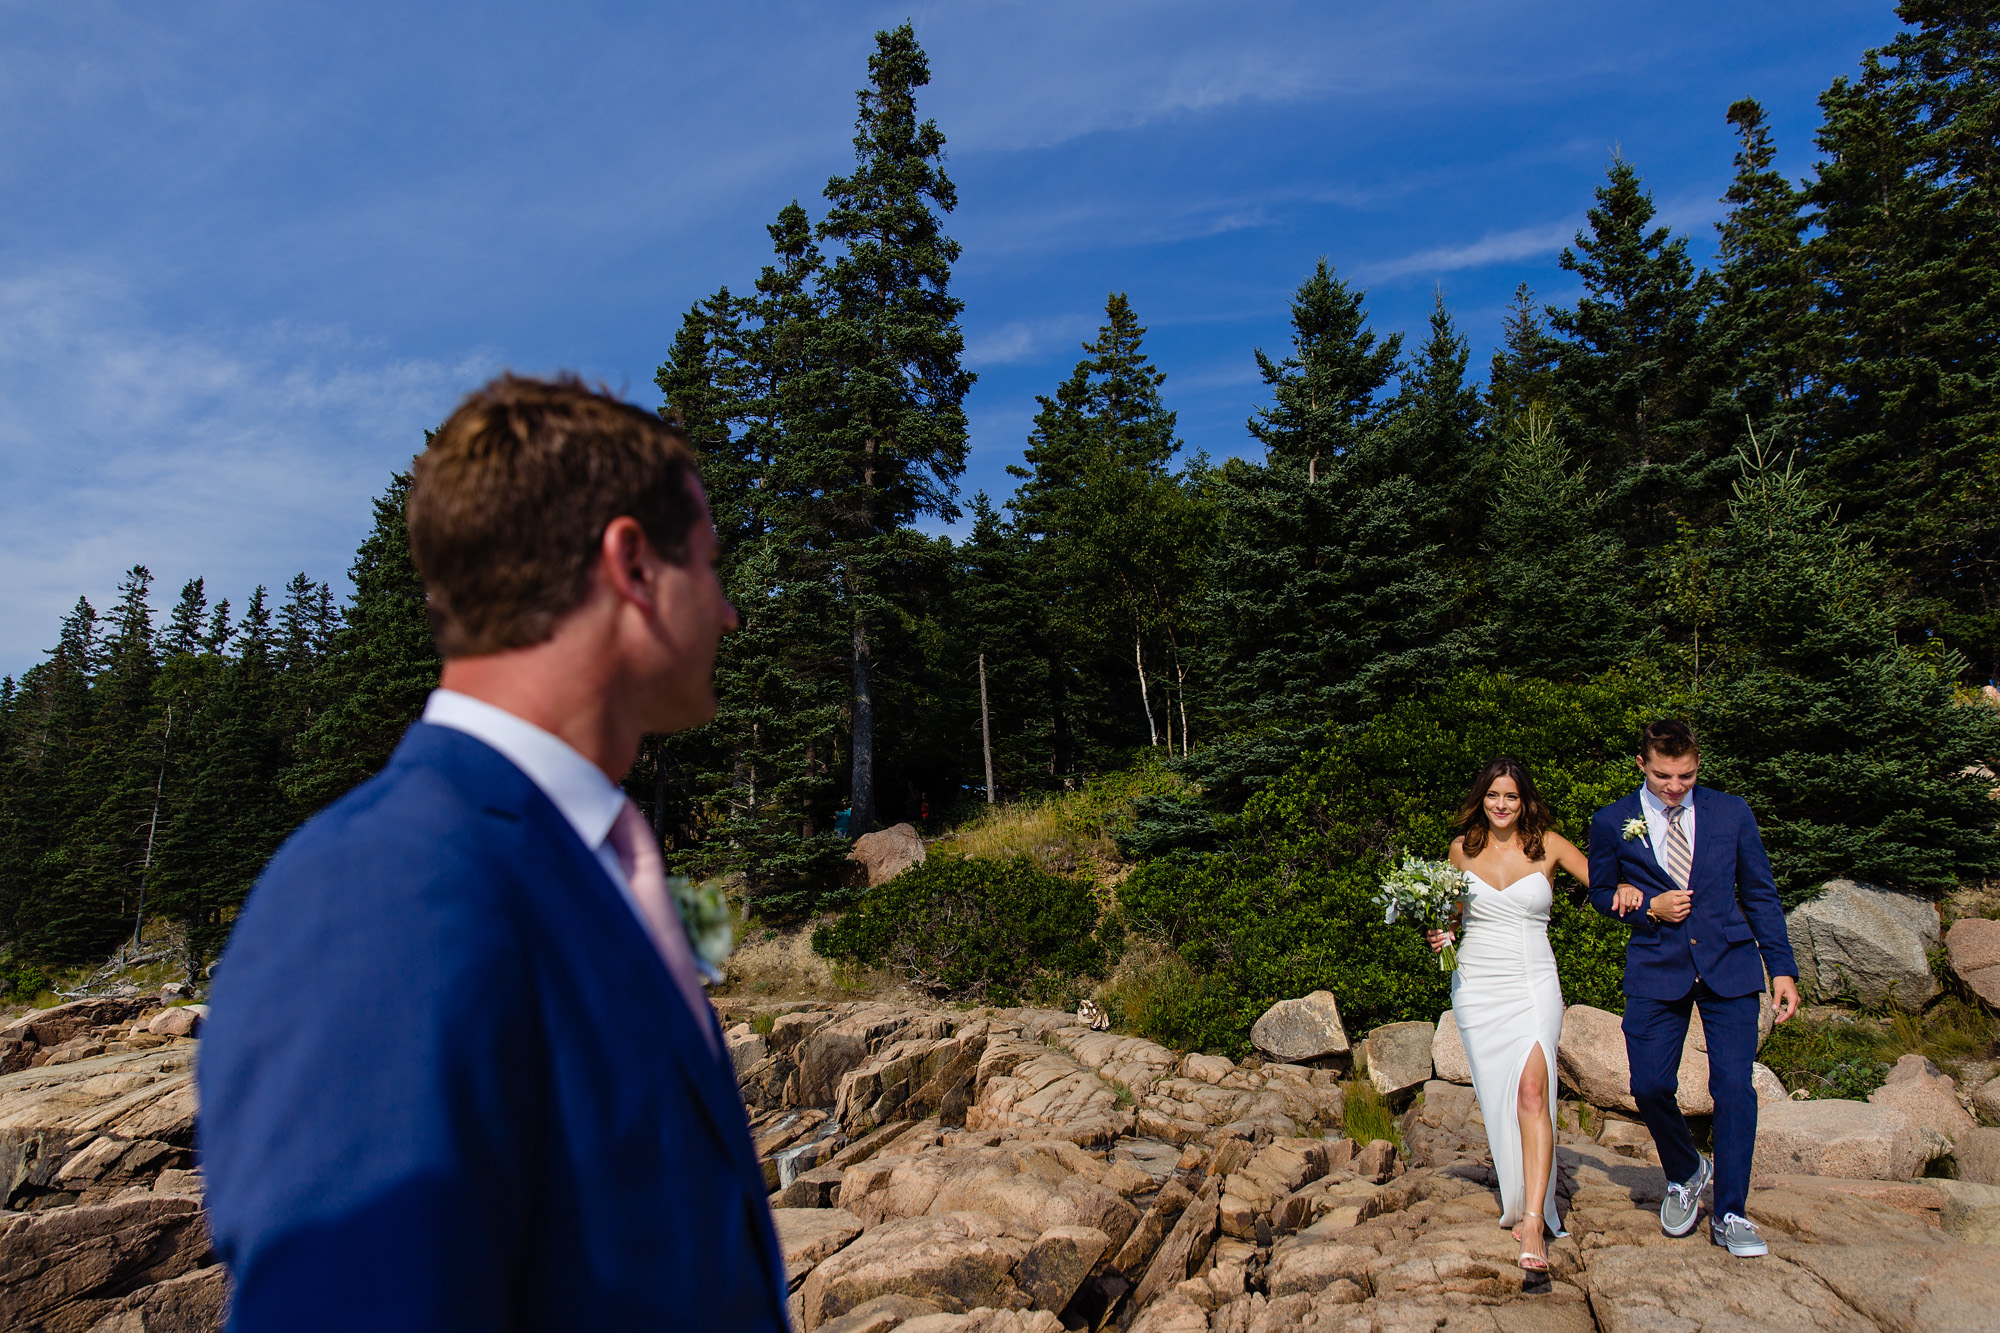 An elopement ceremony at Otter Point in Acadia National Park